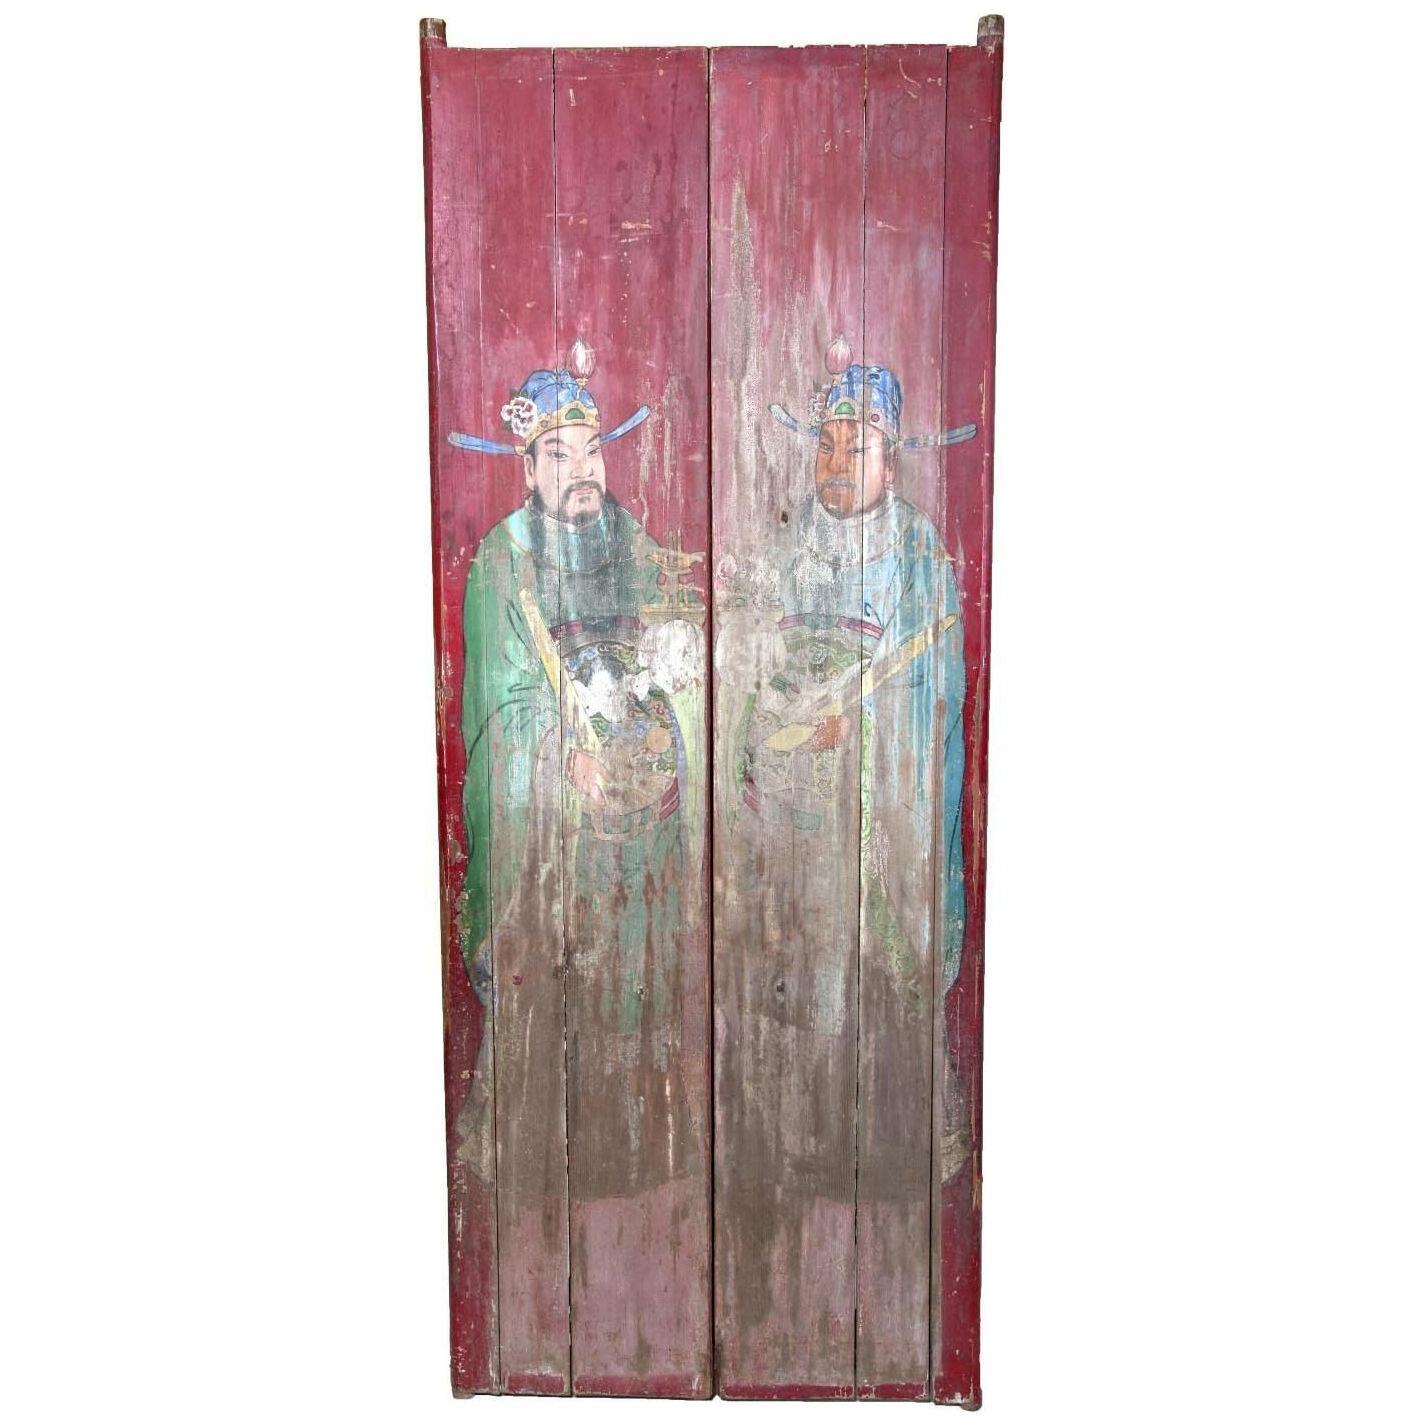 Large Pair of Chinese Lacquered Doors 19th century